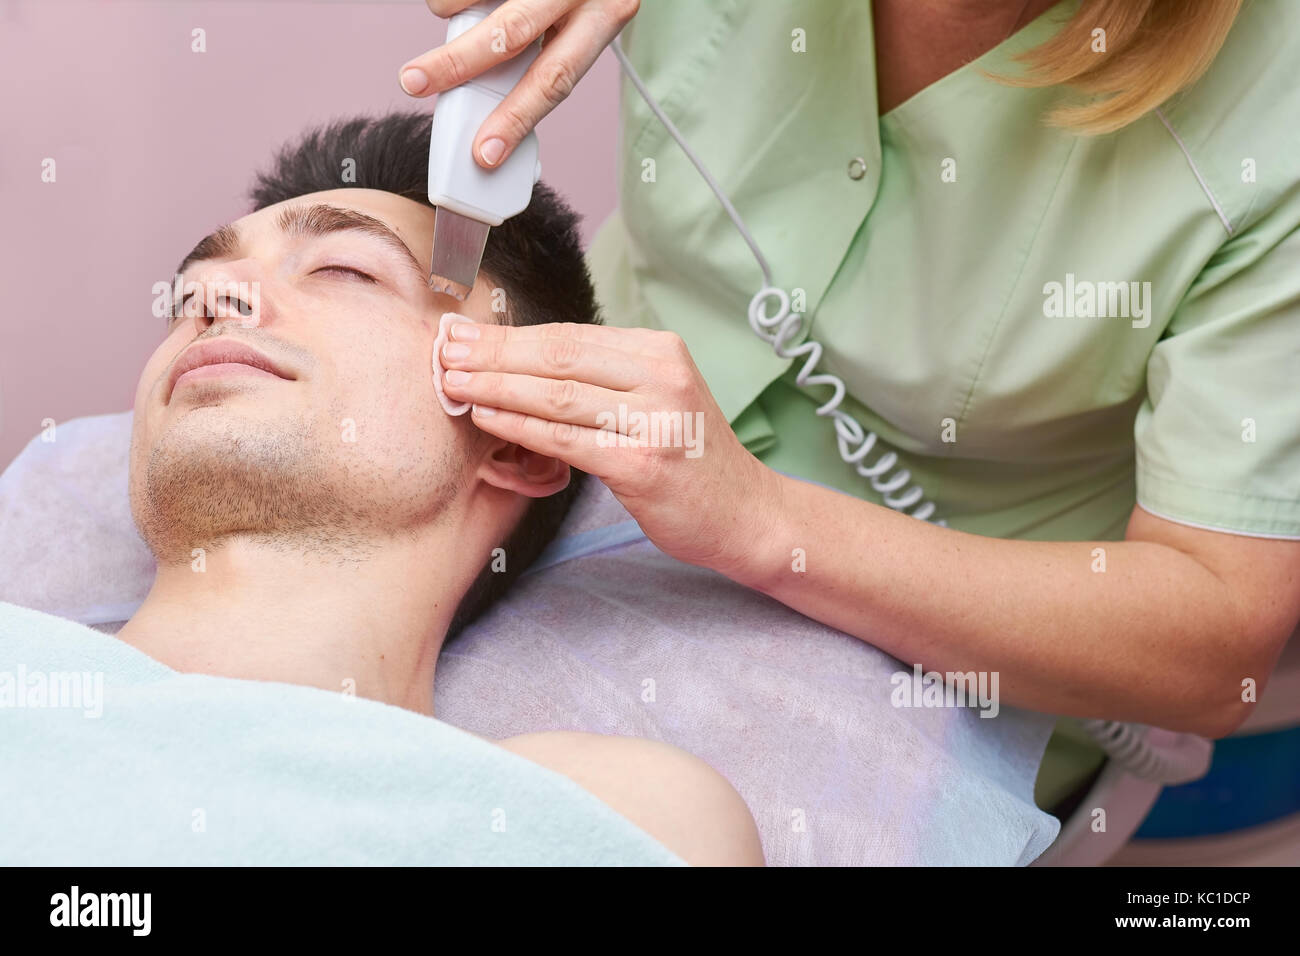 Hands using ultrasonic face scrubber. Stock Photo